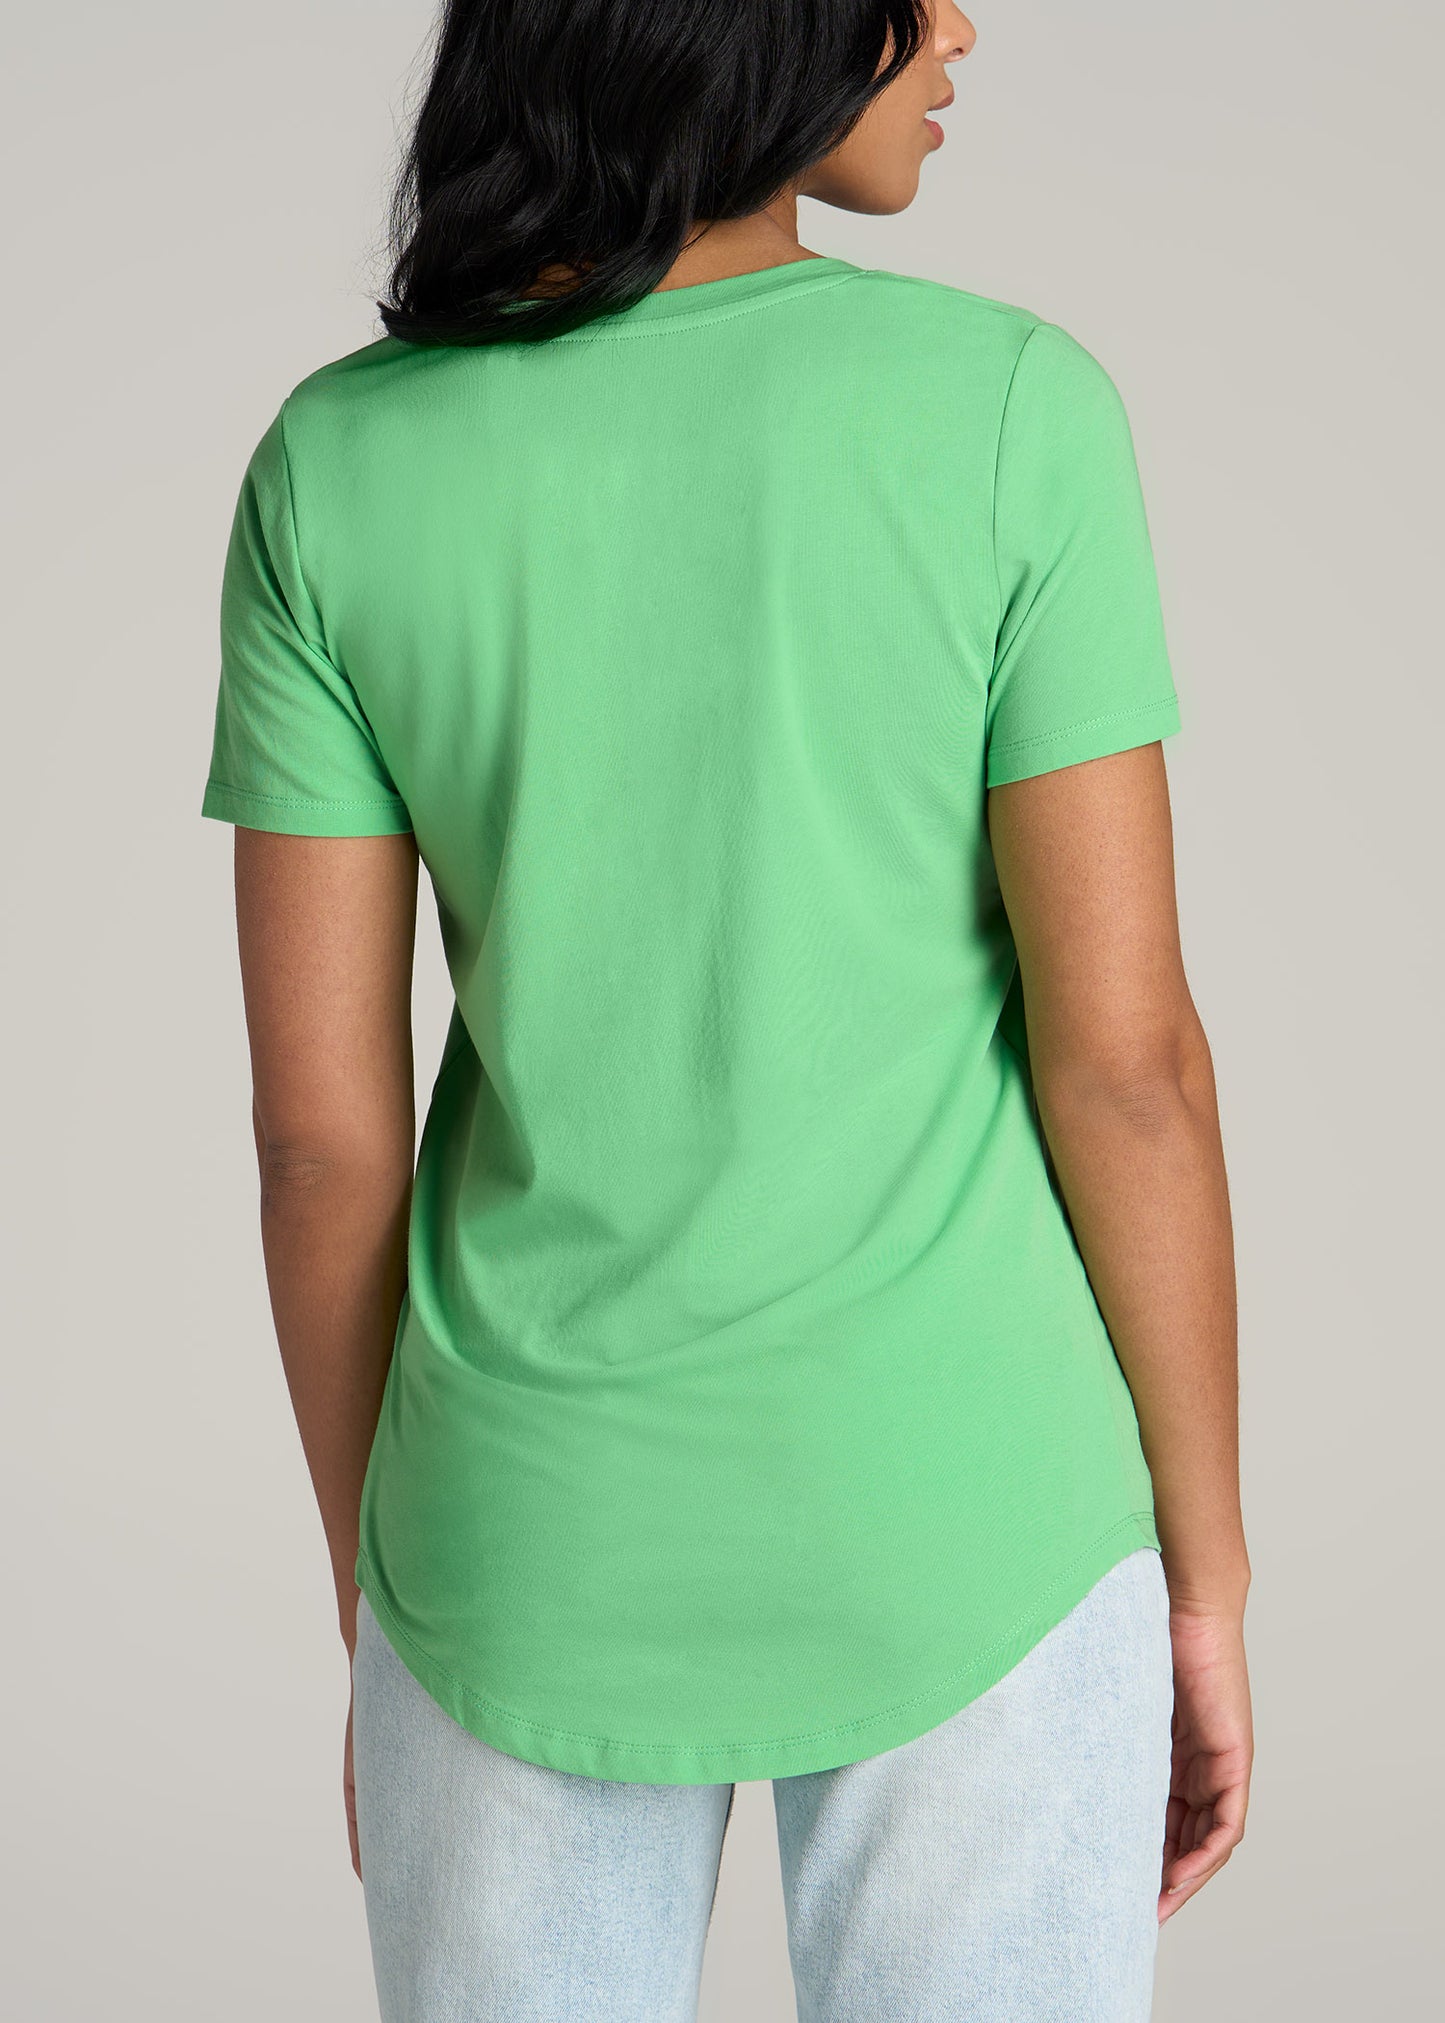 Women's Tall Scoop V-Neck Tee in Matcha